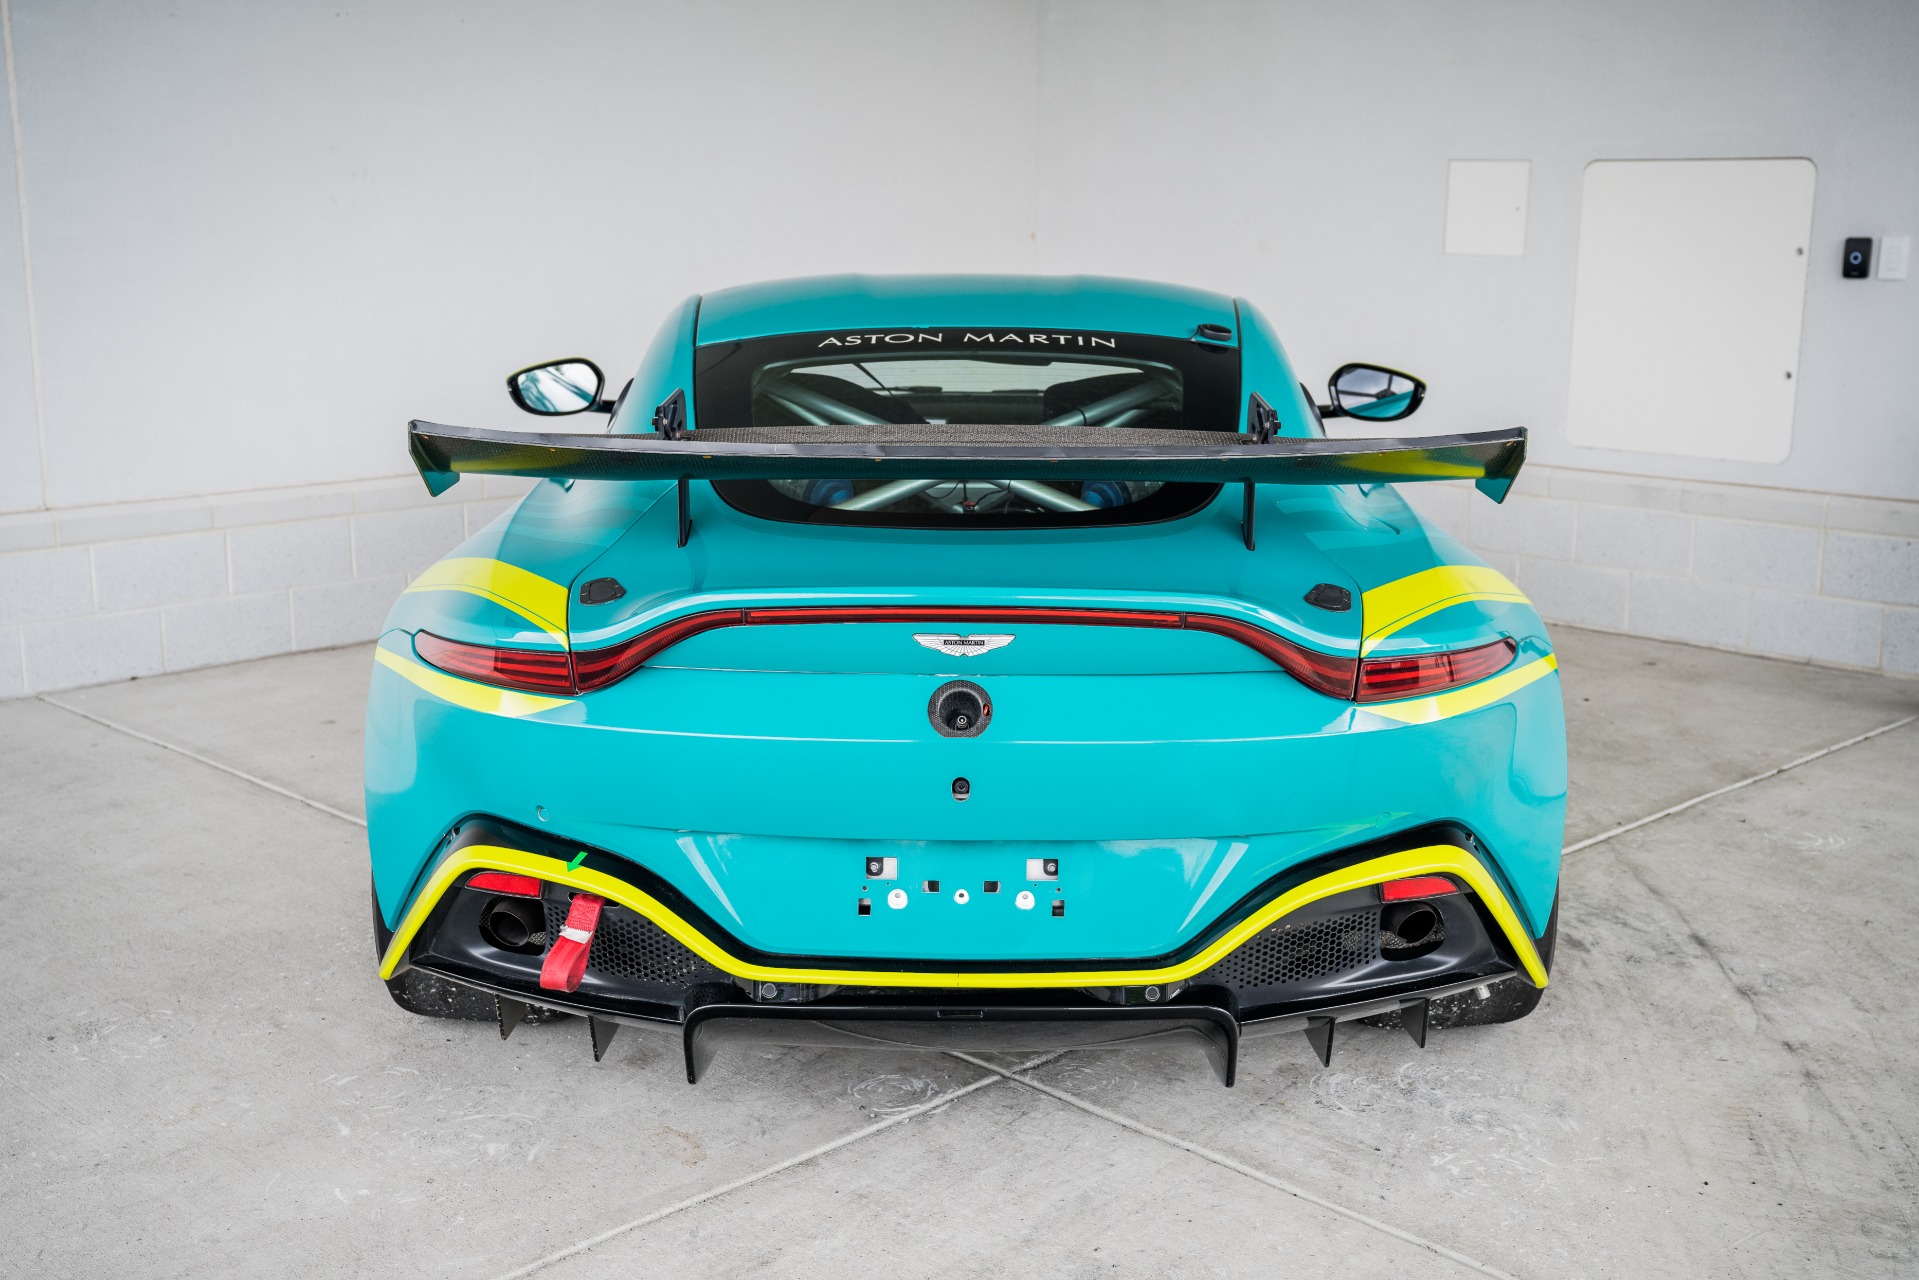 Used 2020 Aston Martin VANTAGE GT4 Competition Race Car For Sale ($399,995)